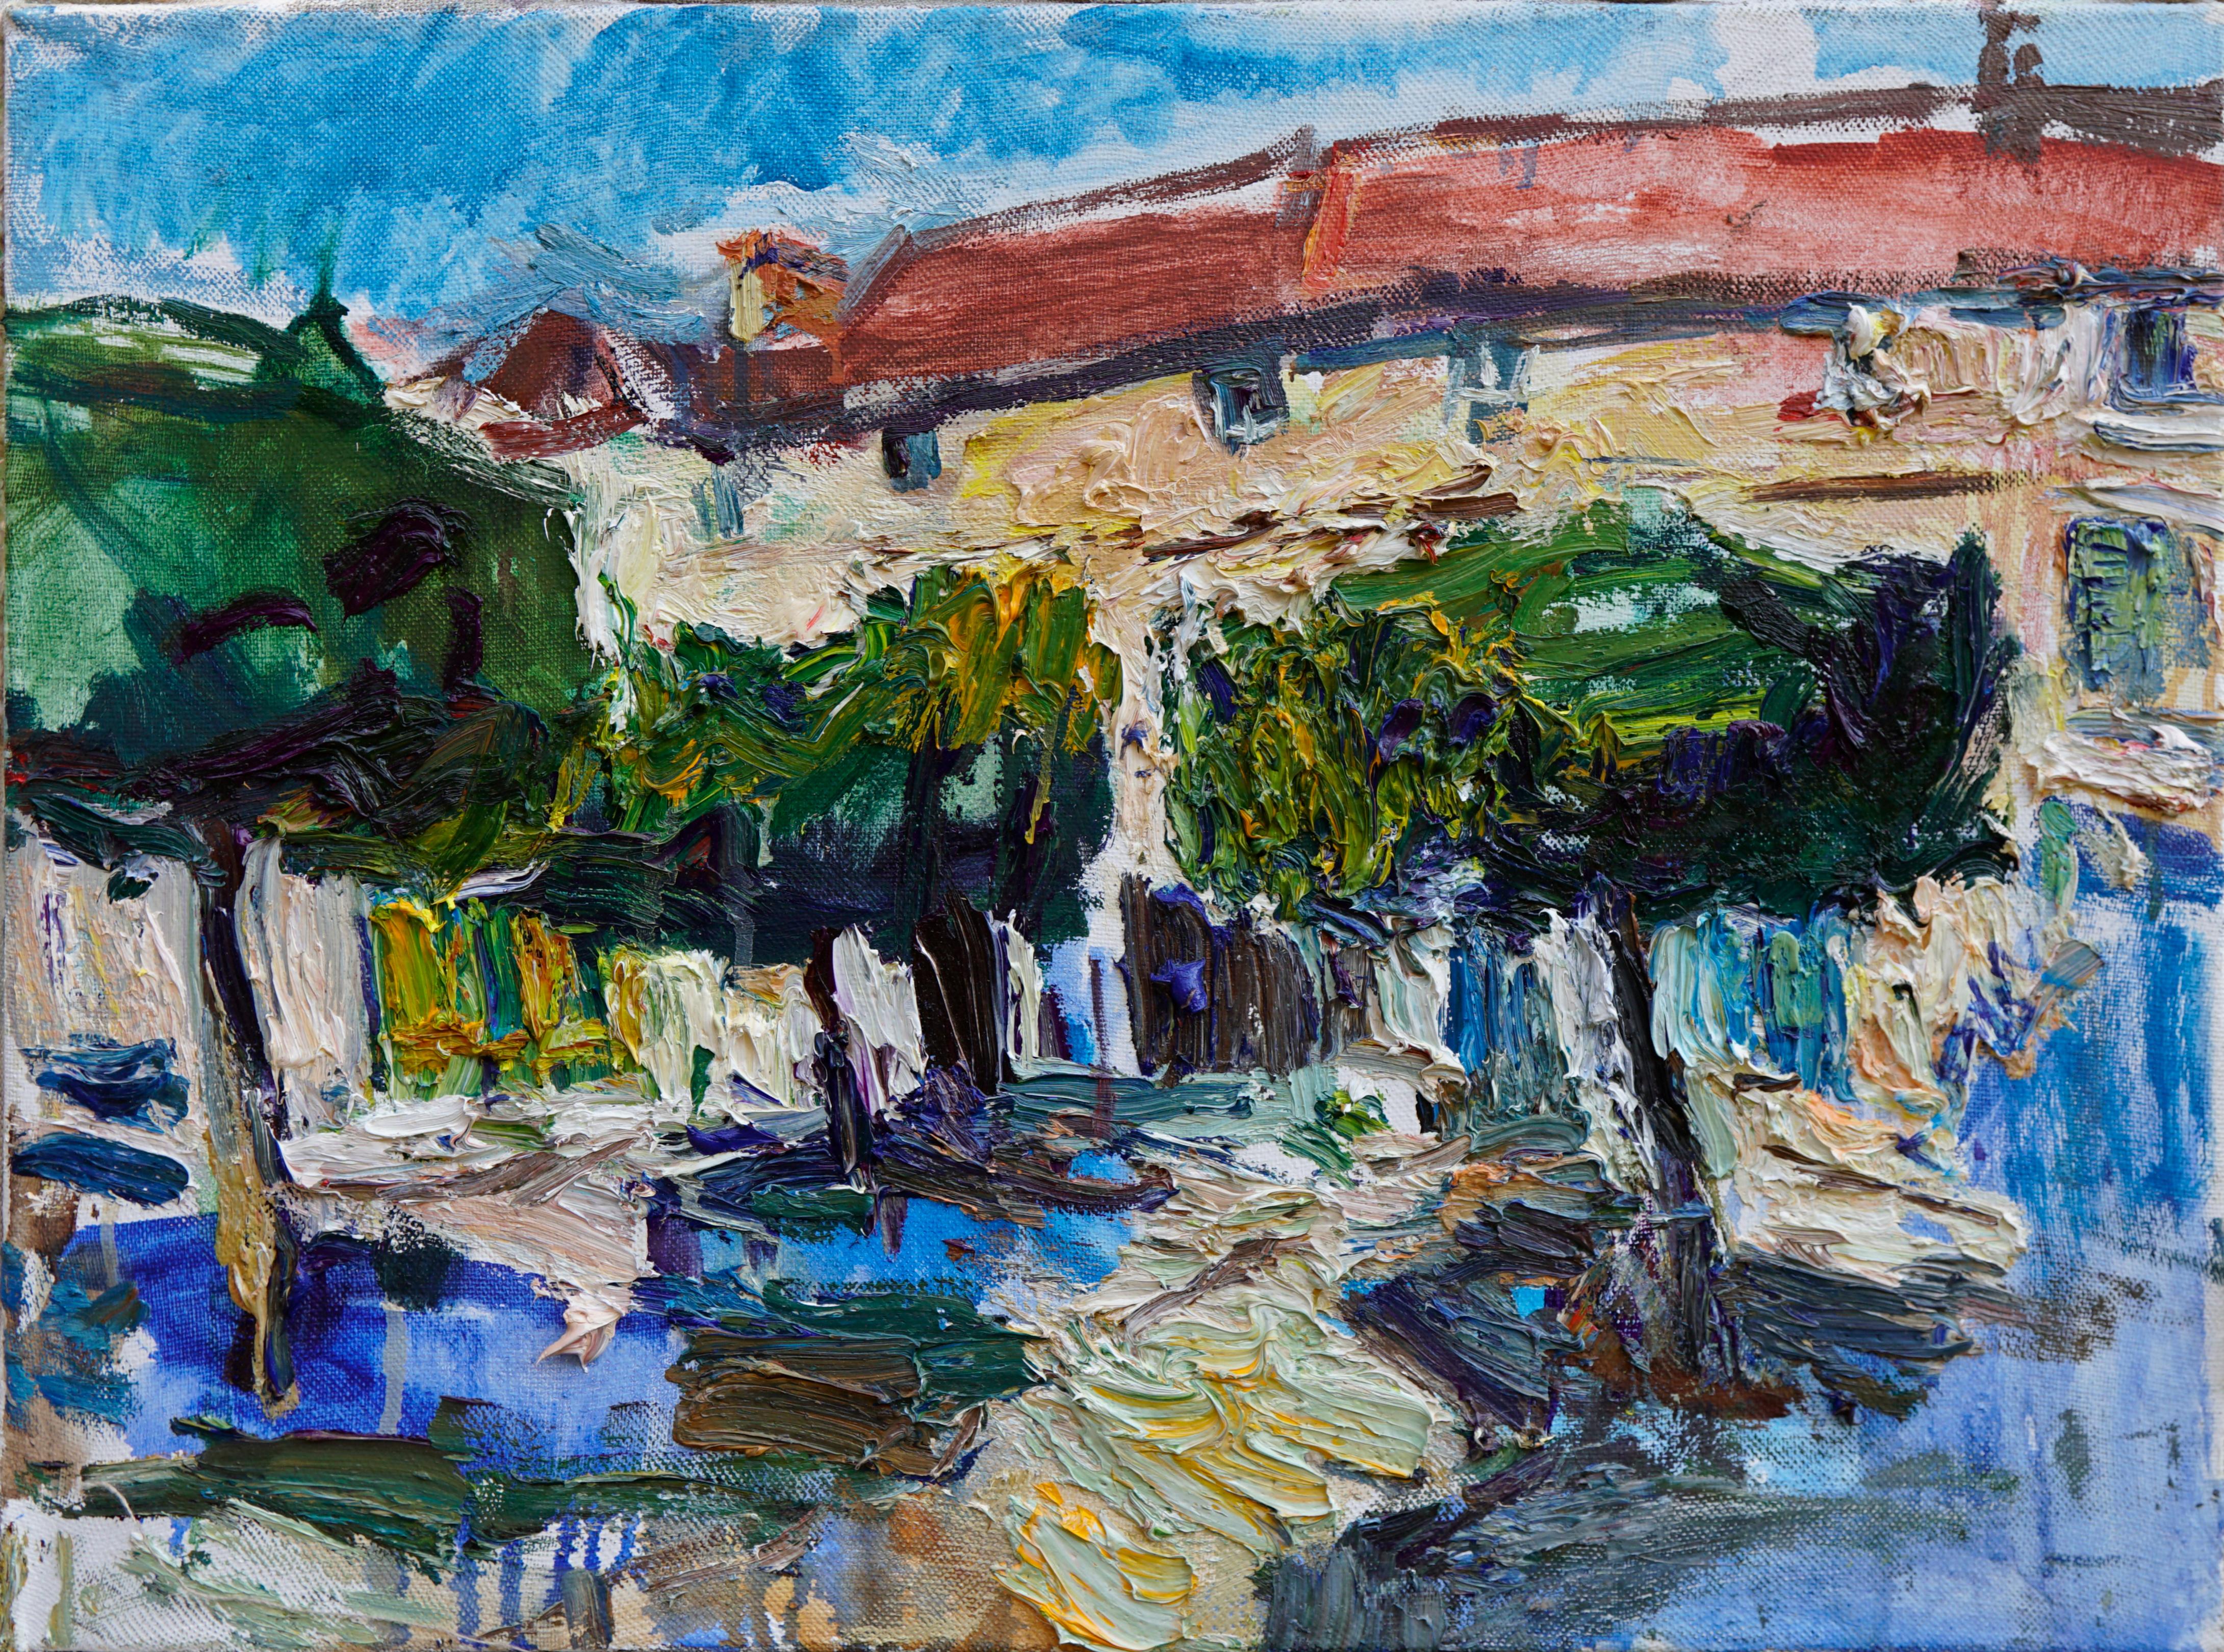 Ulrich Gleiter Landscape Painting - "The Central Square of Ravières" Oil painting